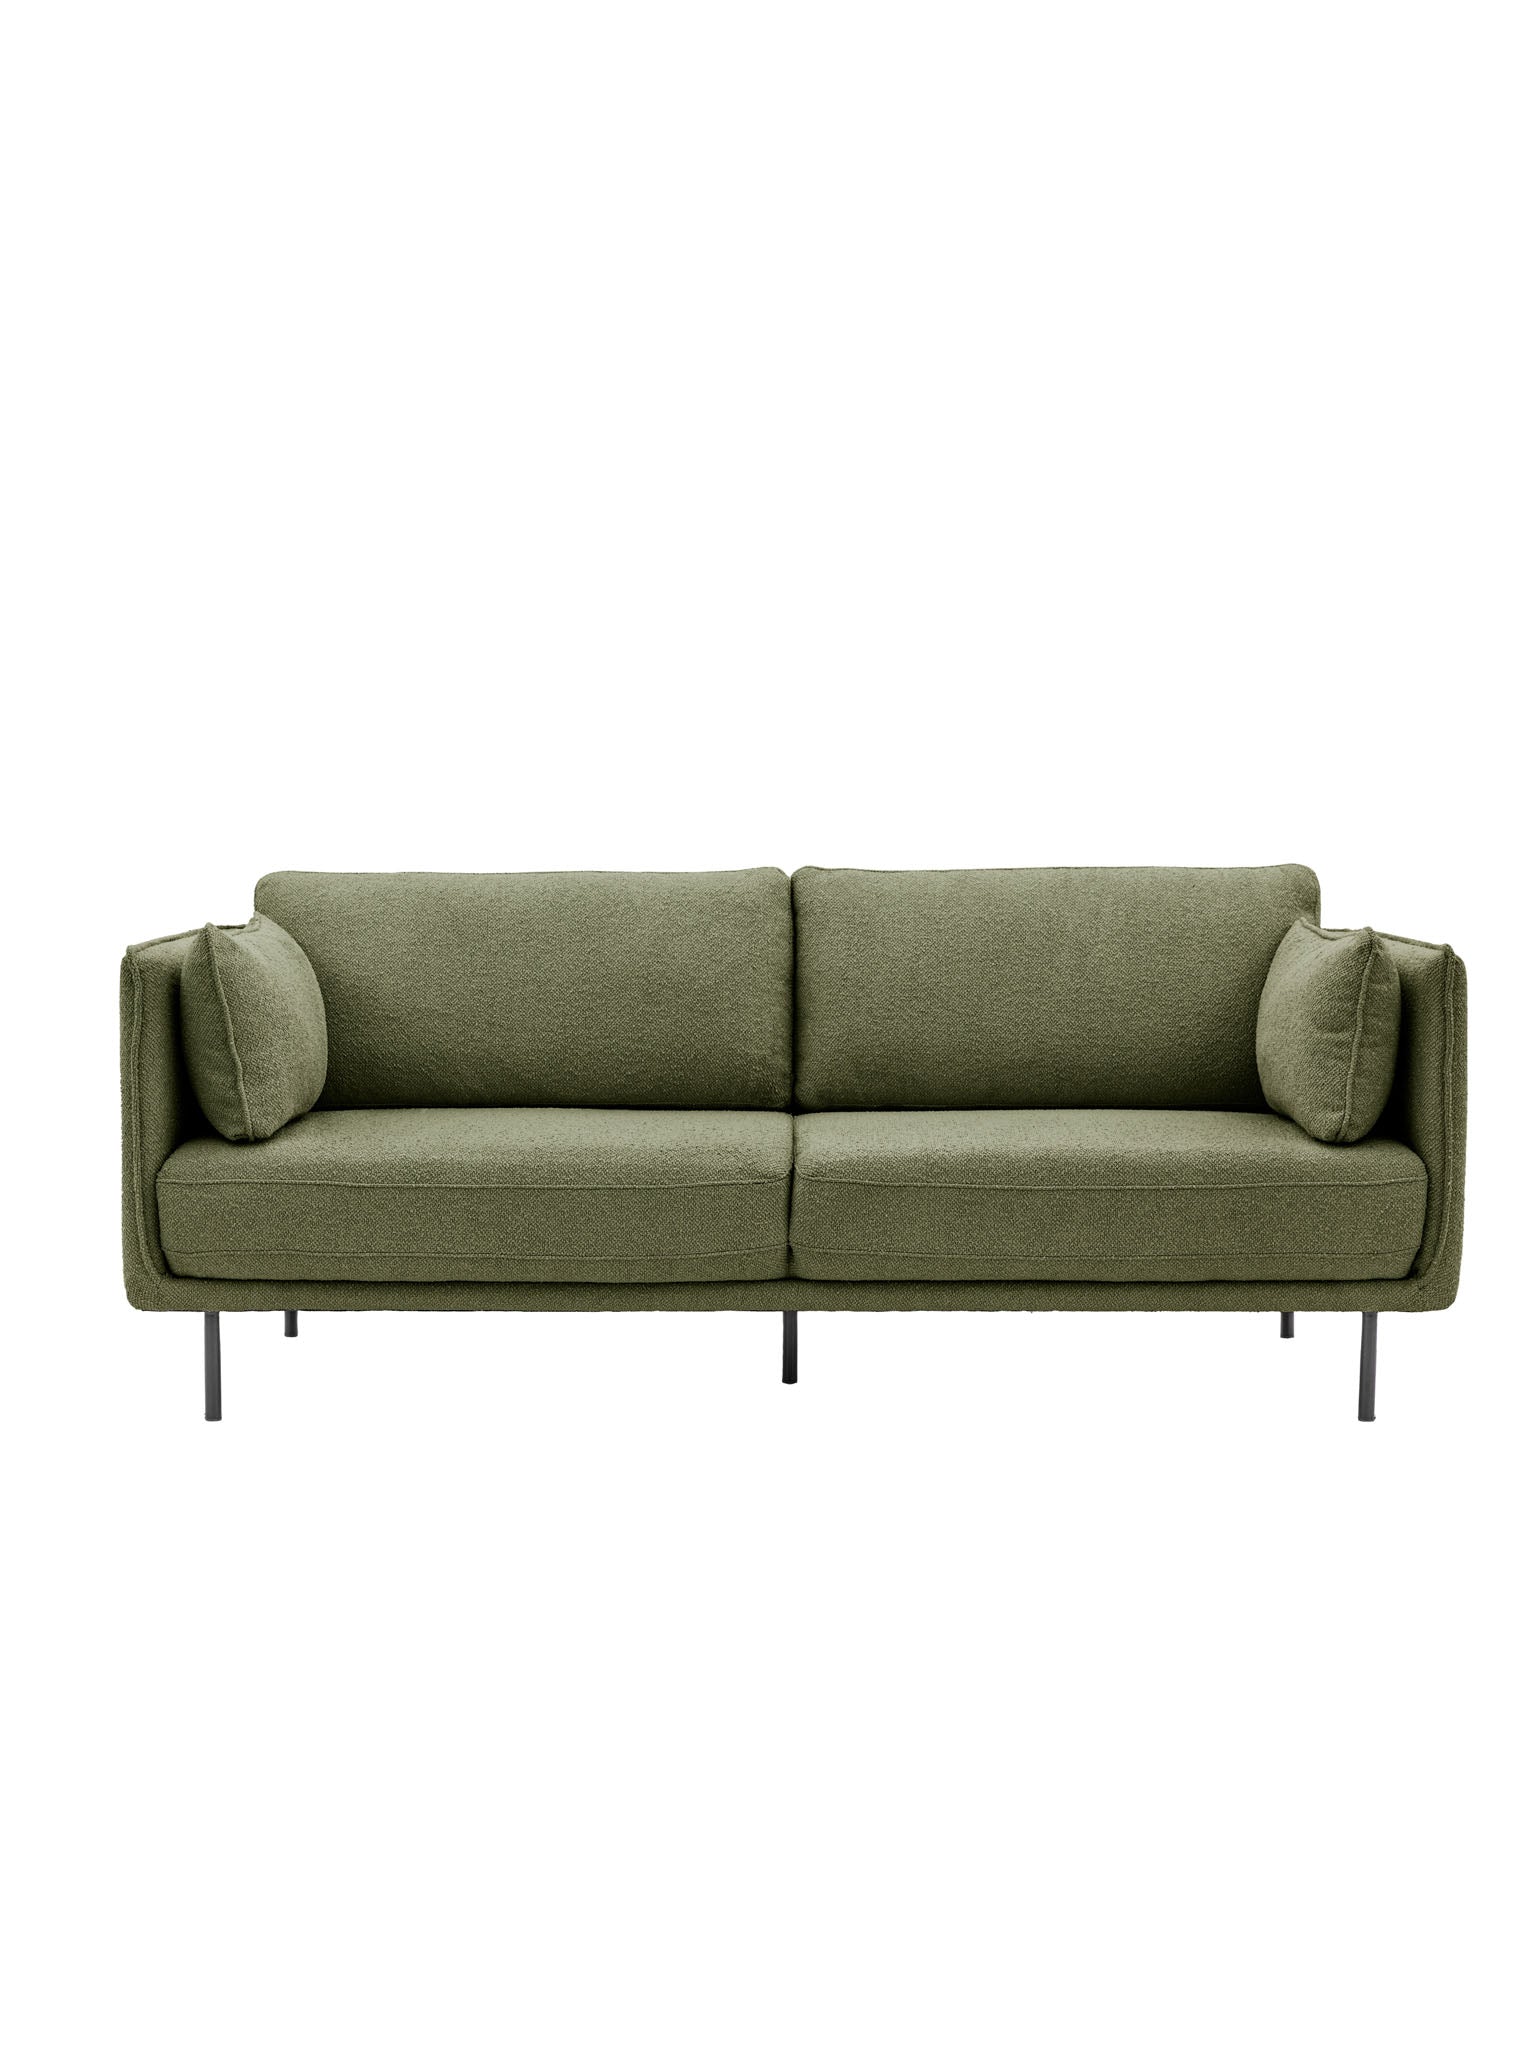 Green 3 seater sofa with black legs